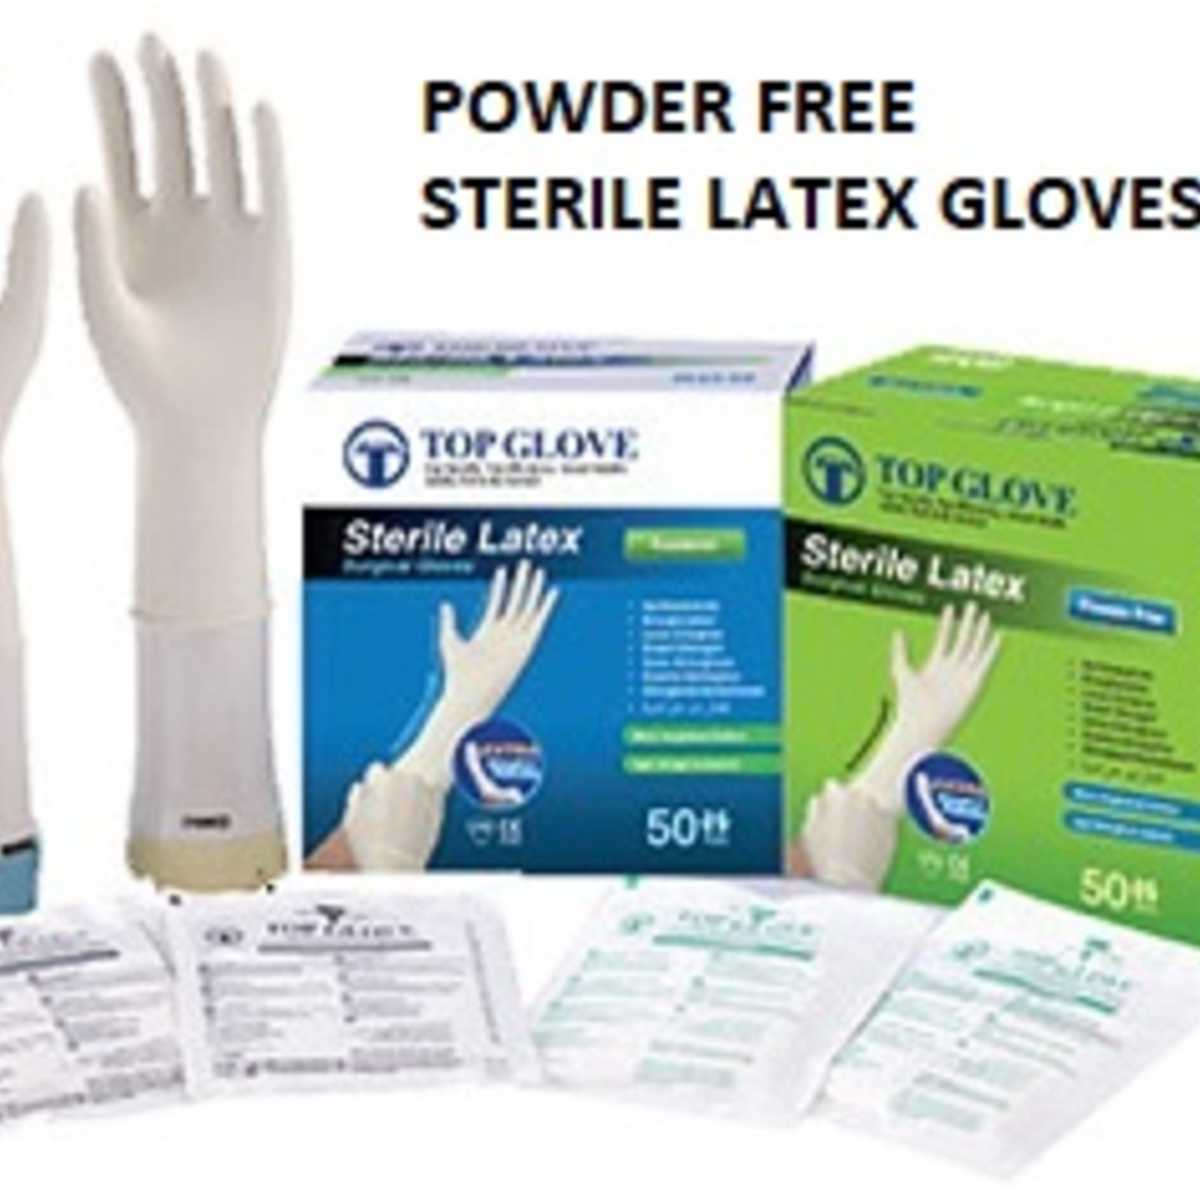 8.0 Sterile Latex Surgical Glove, Powdered Free